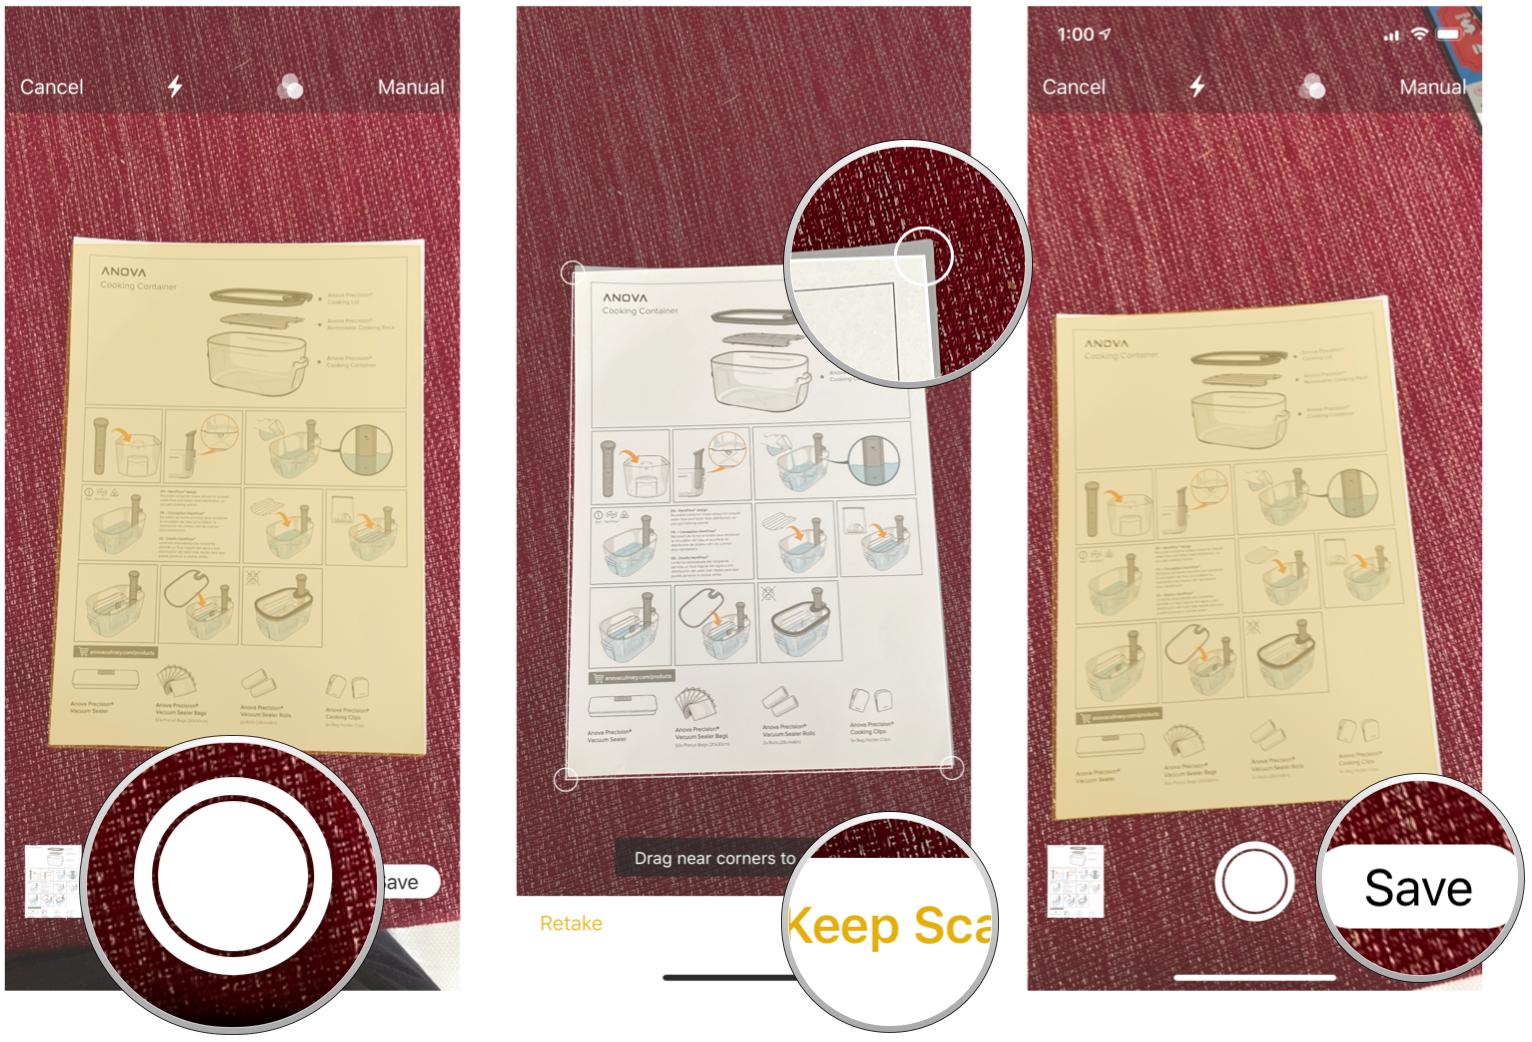 Scan a document to a note in Notes by showing steps: In Manual Document Capture, tap Cature button, adjust by dragging corner circles, tap Retake or Keep Scan, then tap Save